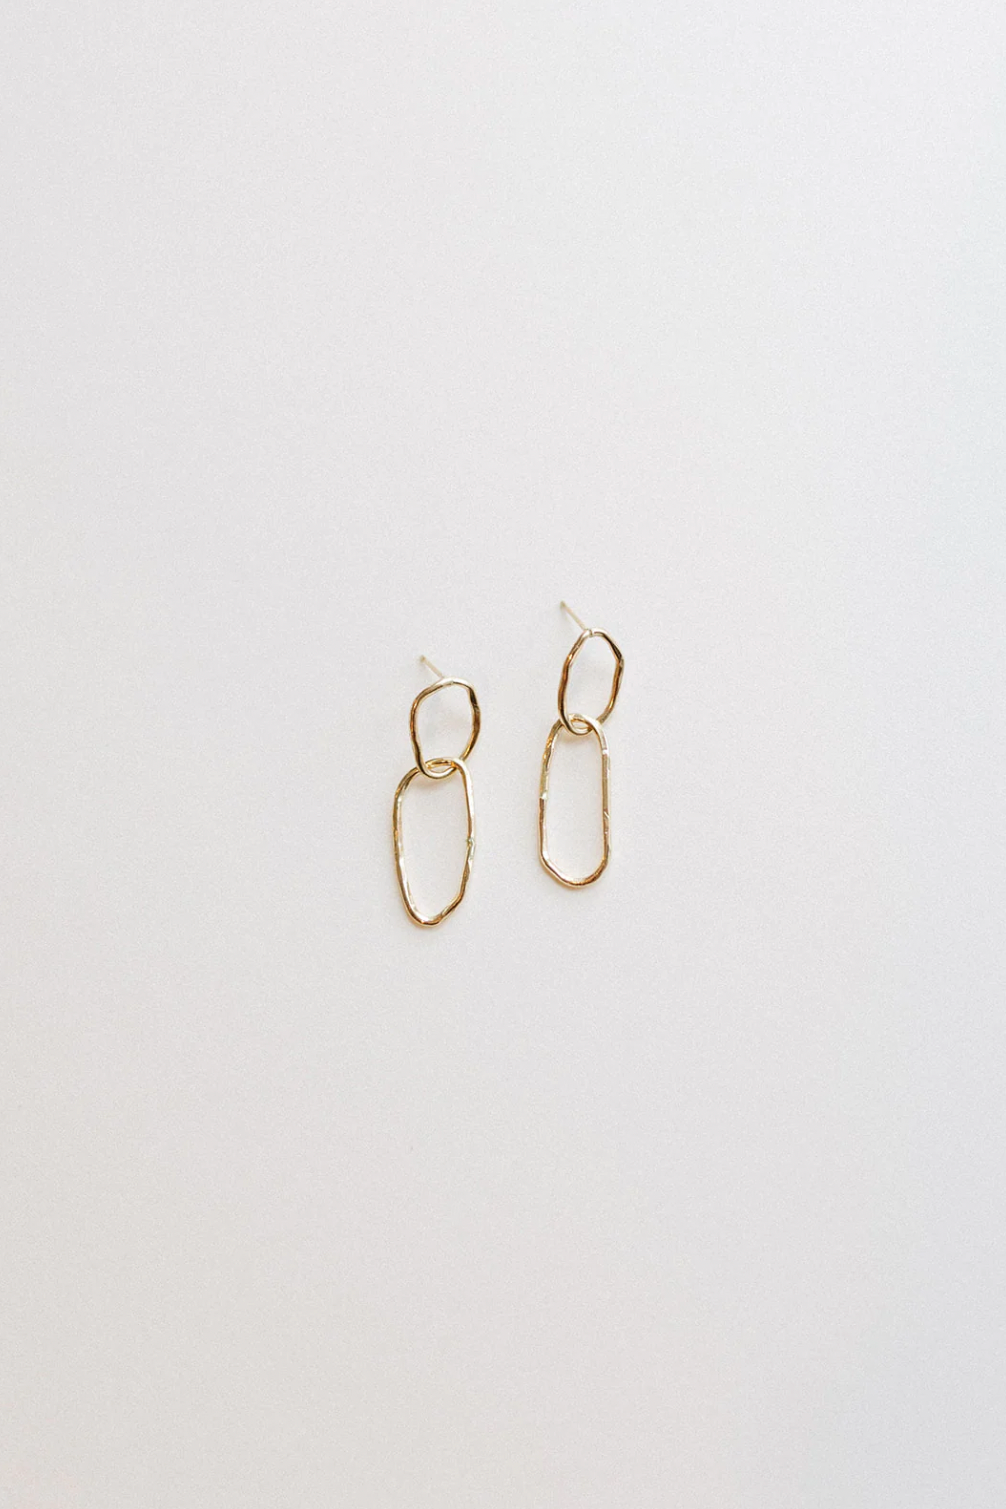 Our Spare Change Quinn Statement Earrings